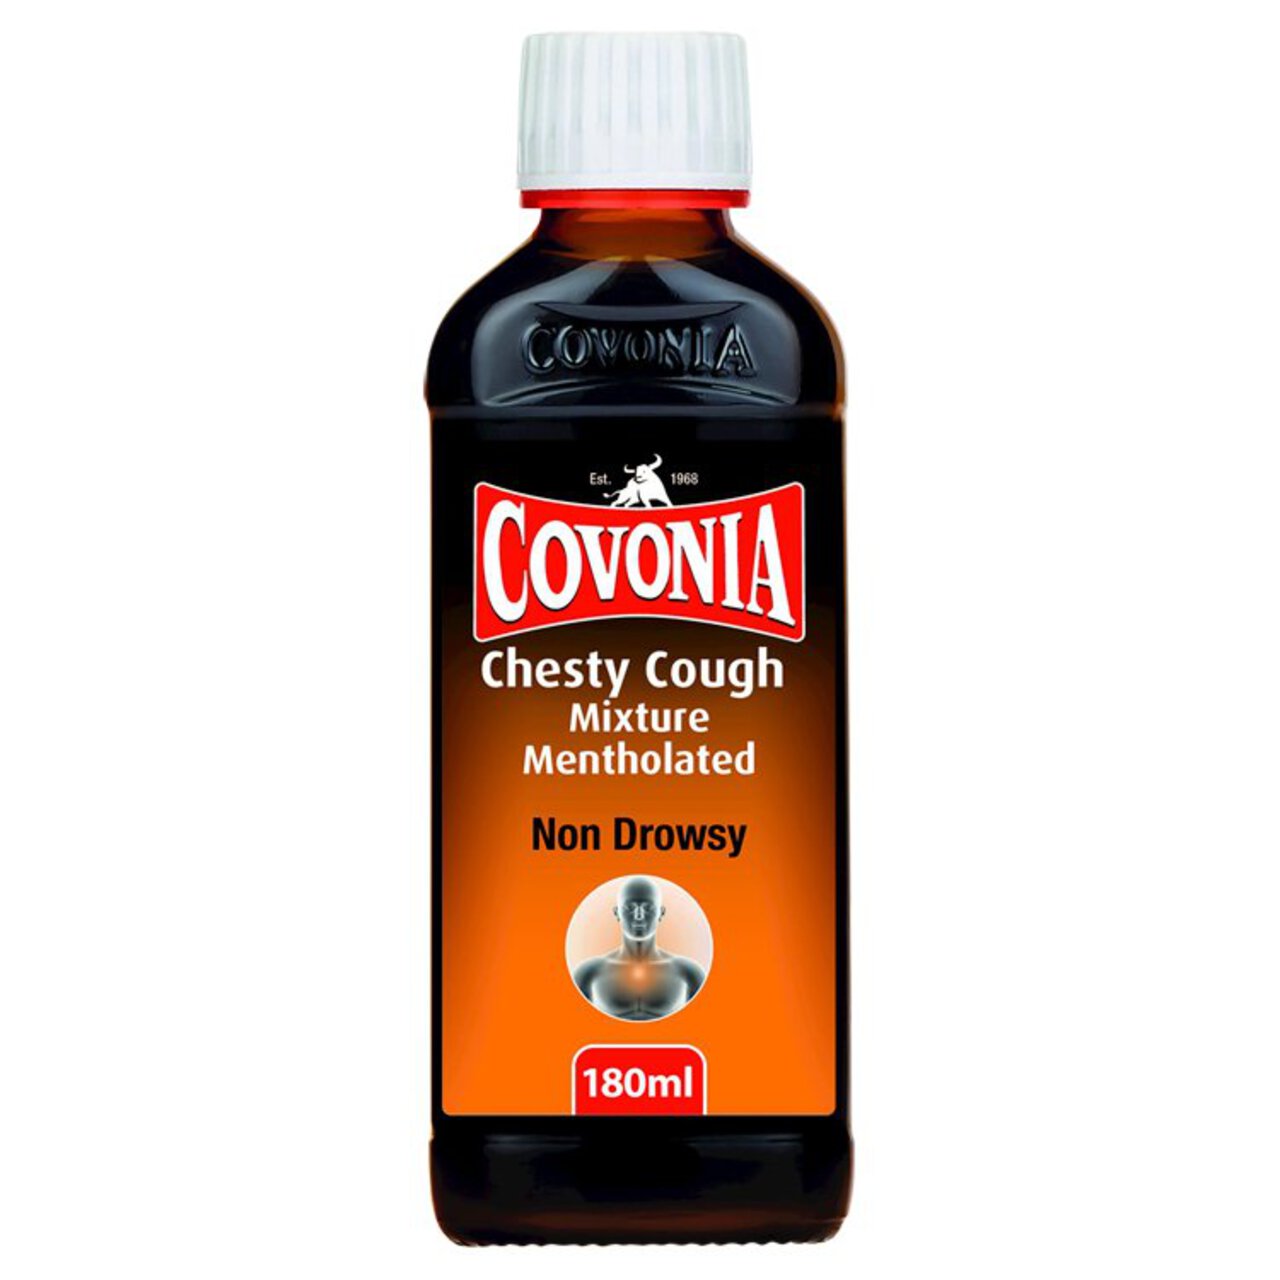 Covonia Chesty Cough Mixture Oral Solution 180ml